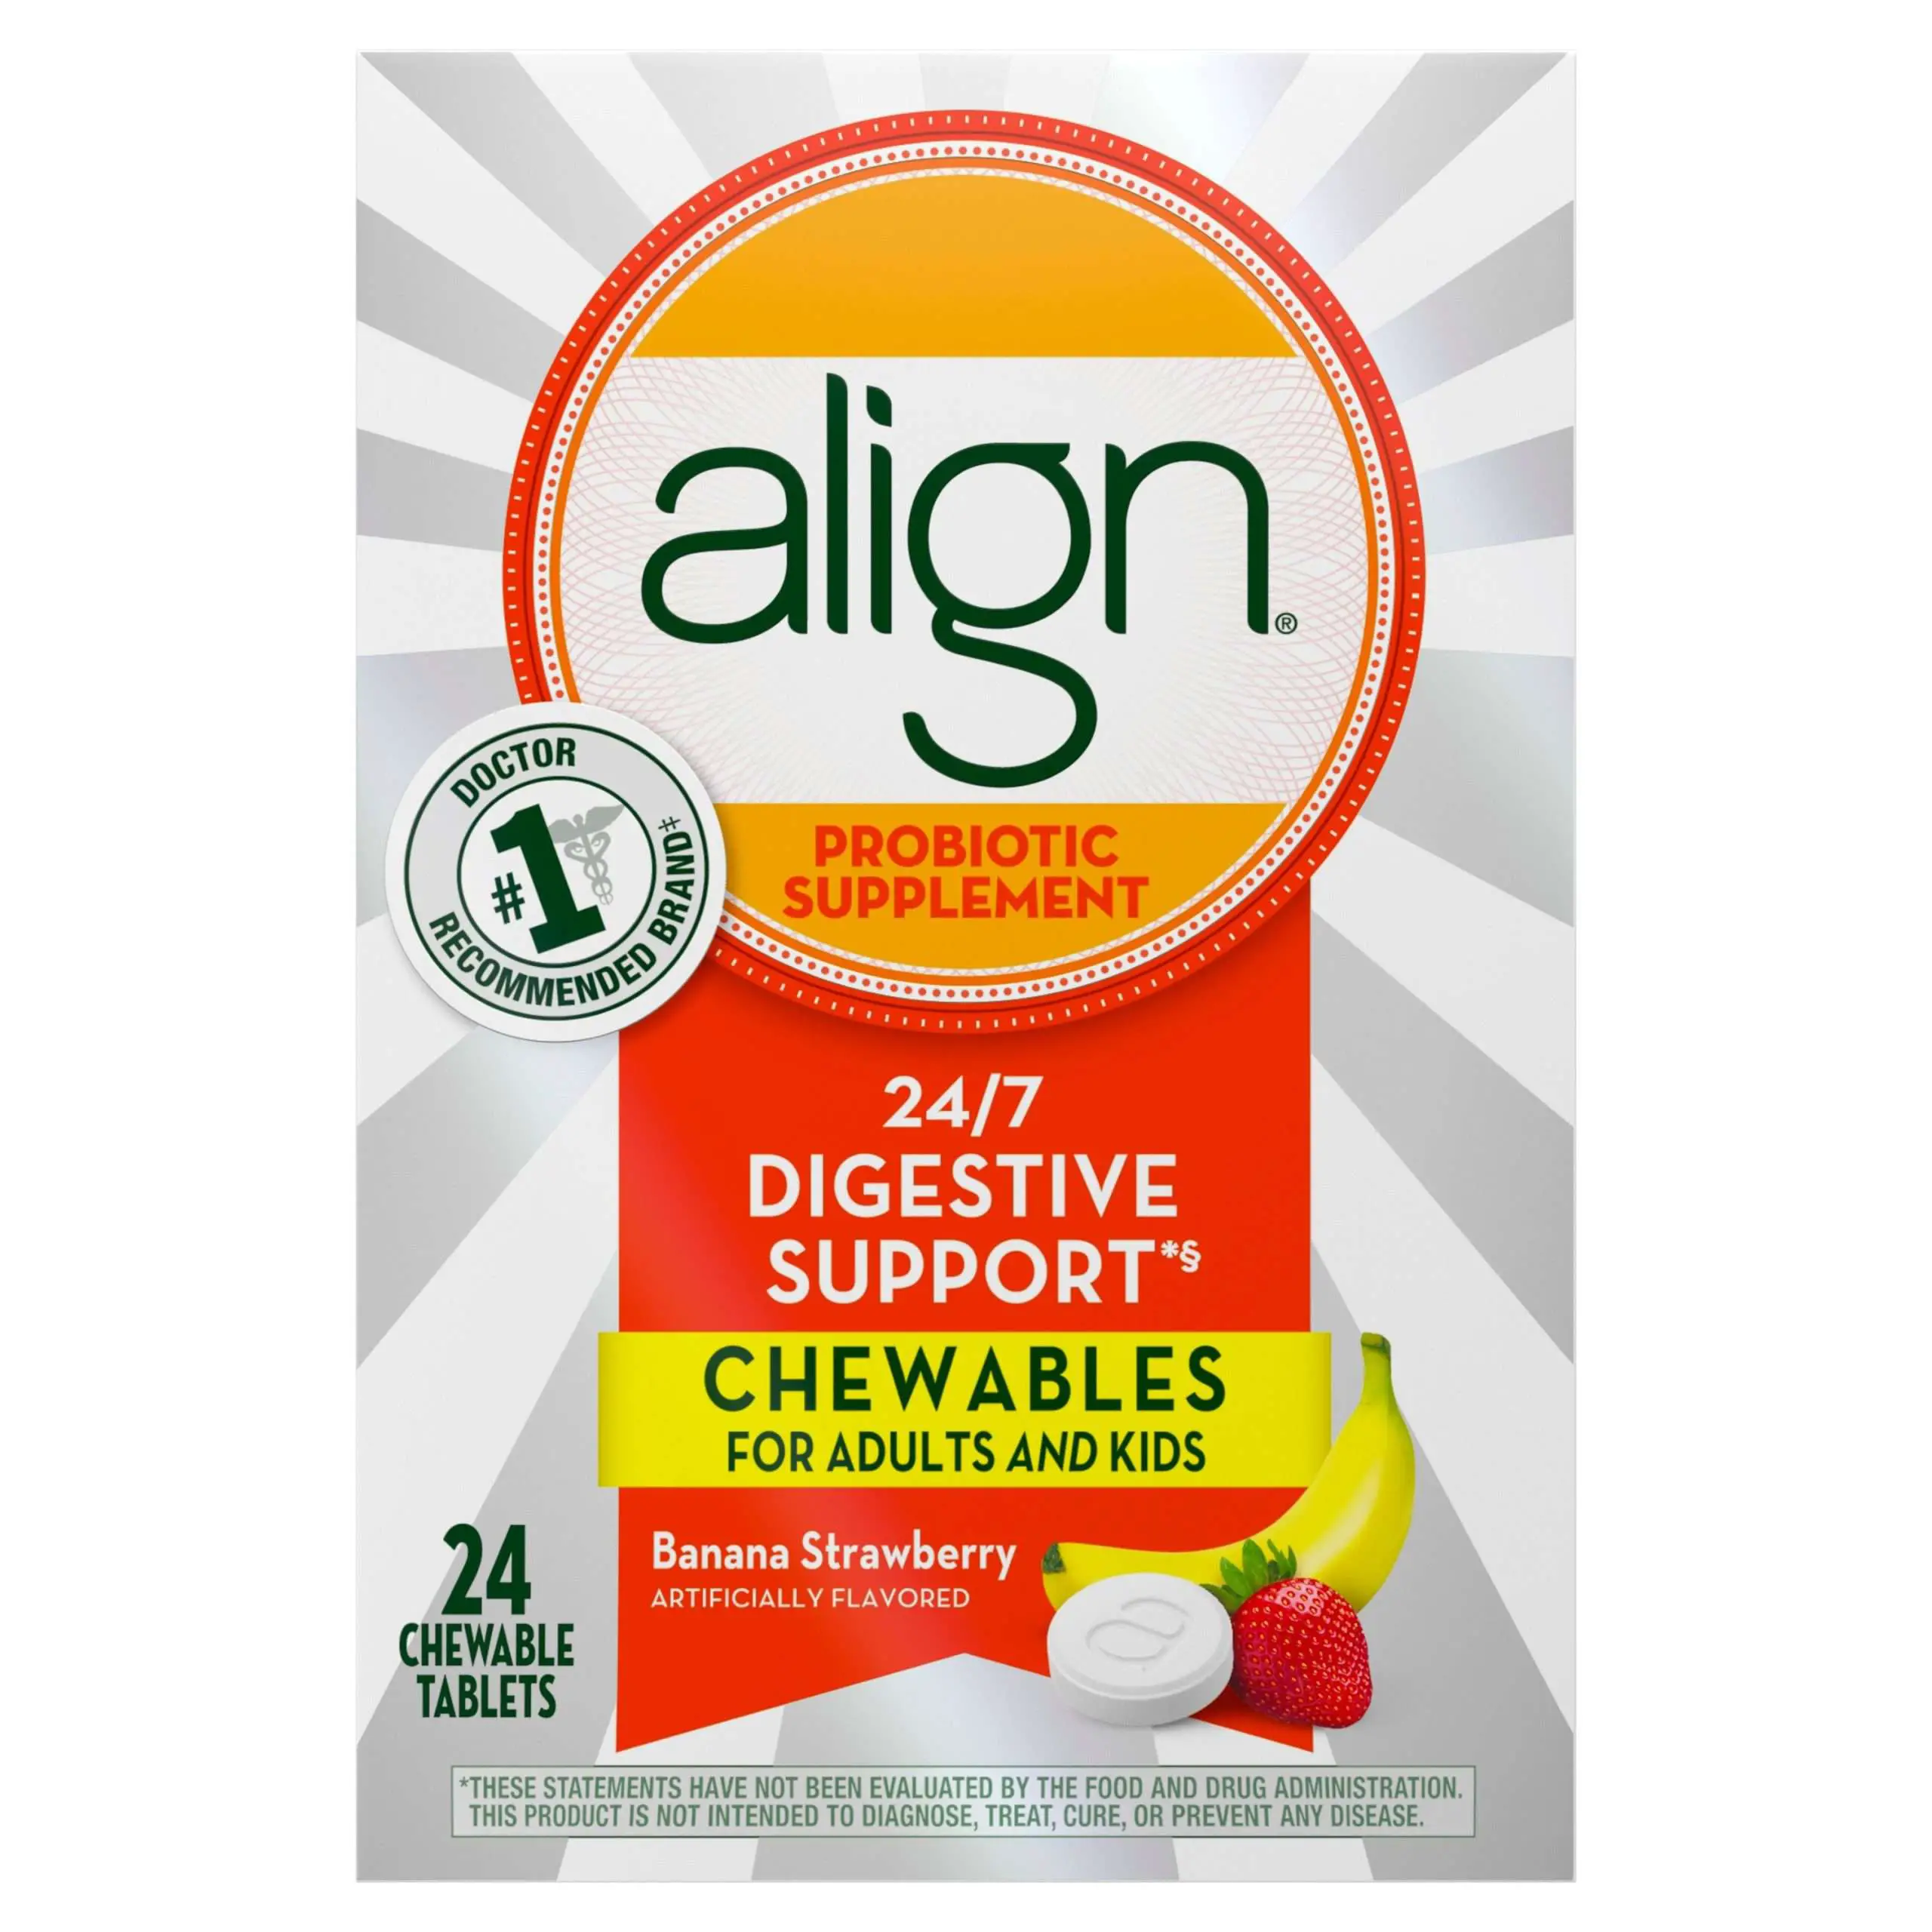 Align Probiotic Banana Strawberry Chewable Tablets